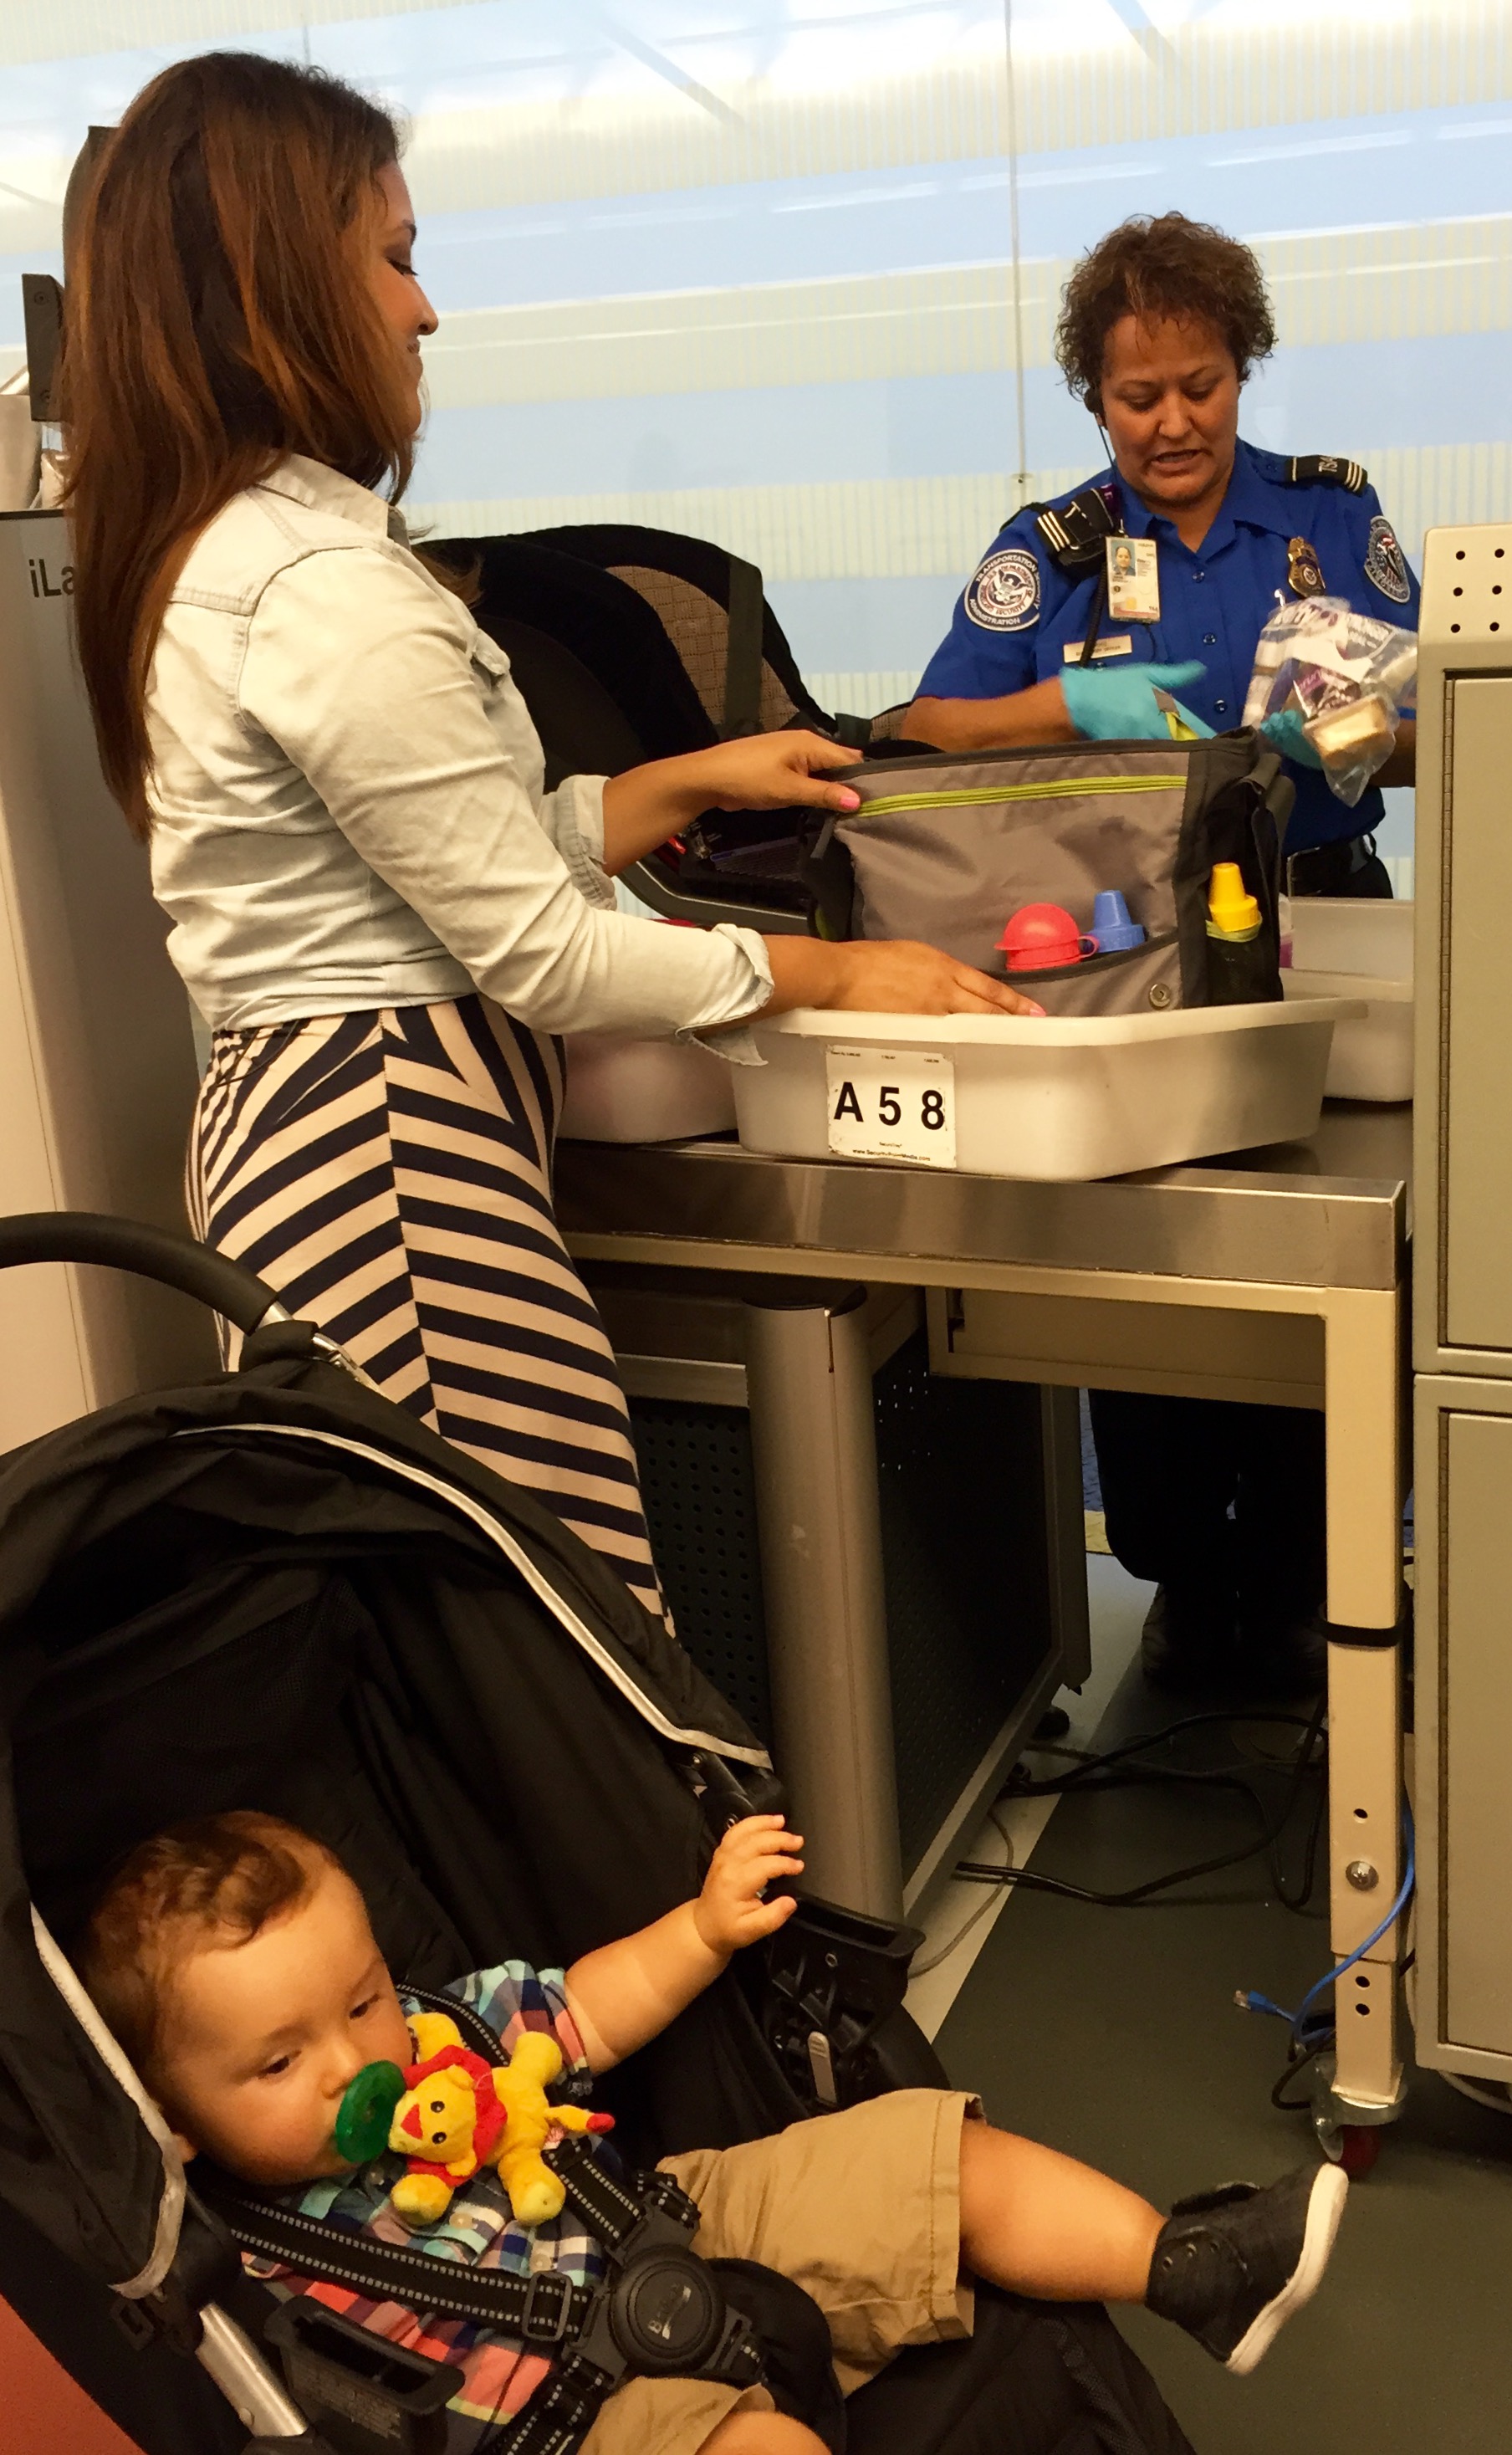 Travel Gear to Ease Flying With Kids